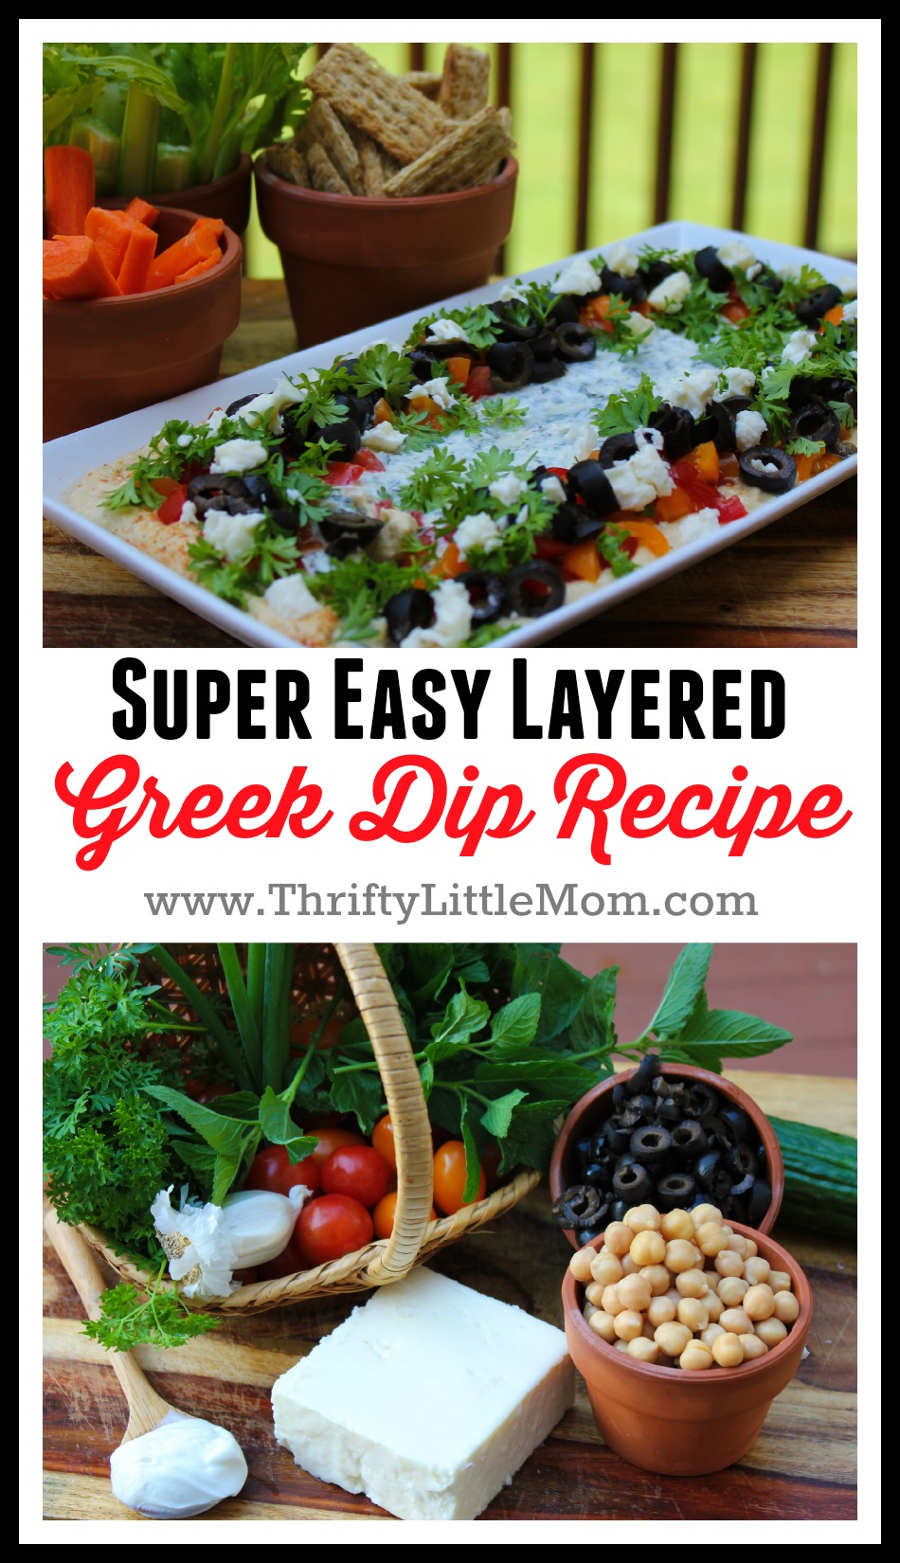 Super Easy Layered Greek Dip Recipe. A perfect party dip